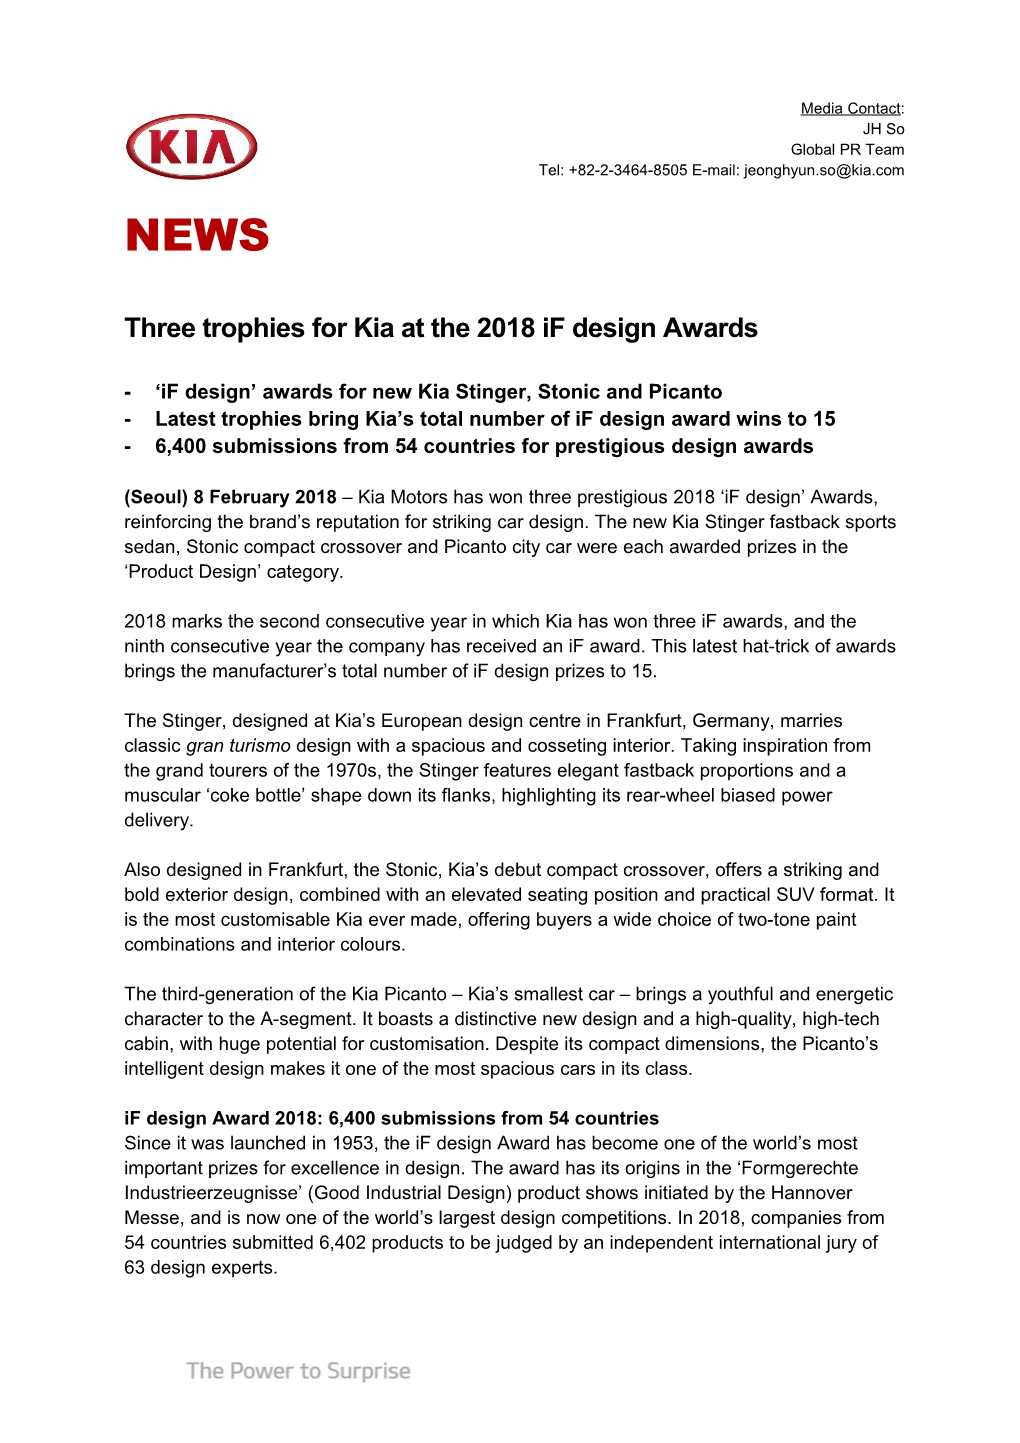 Three Trophies for Kia at the 2018 If Design Awards